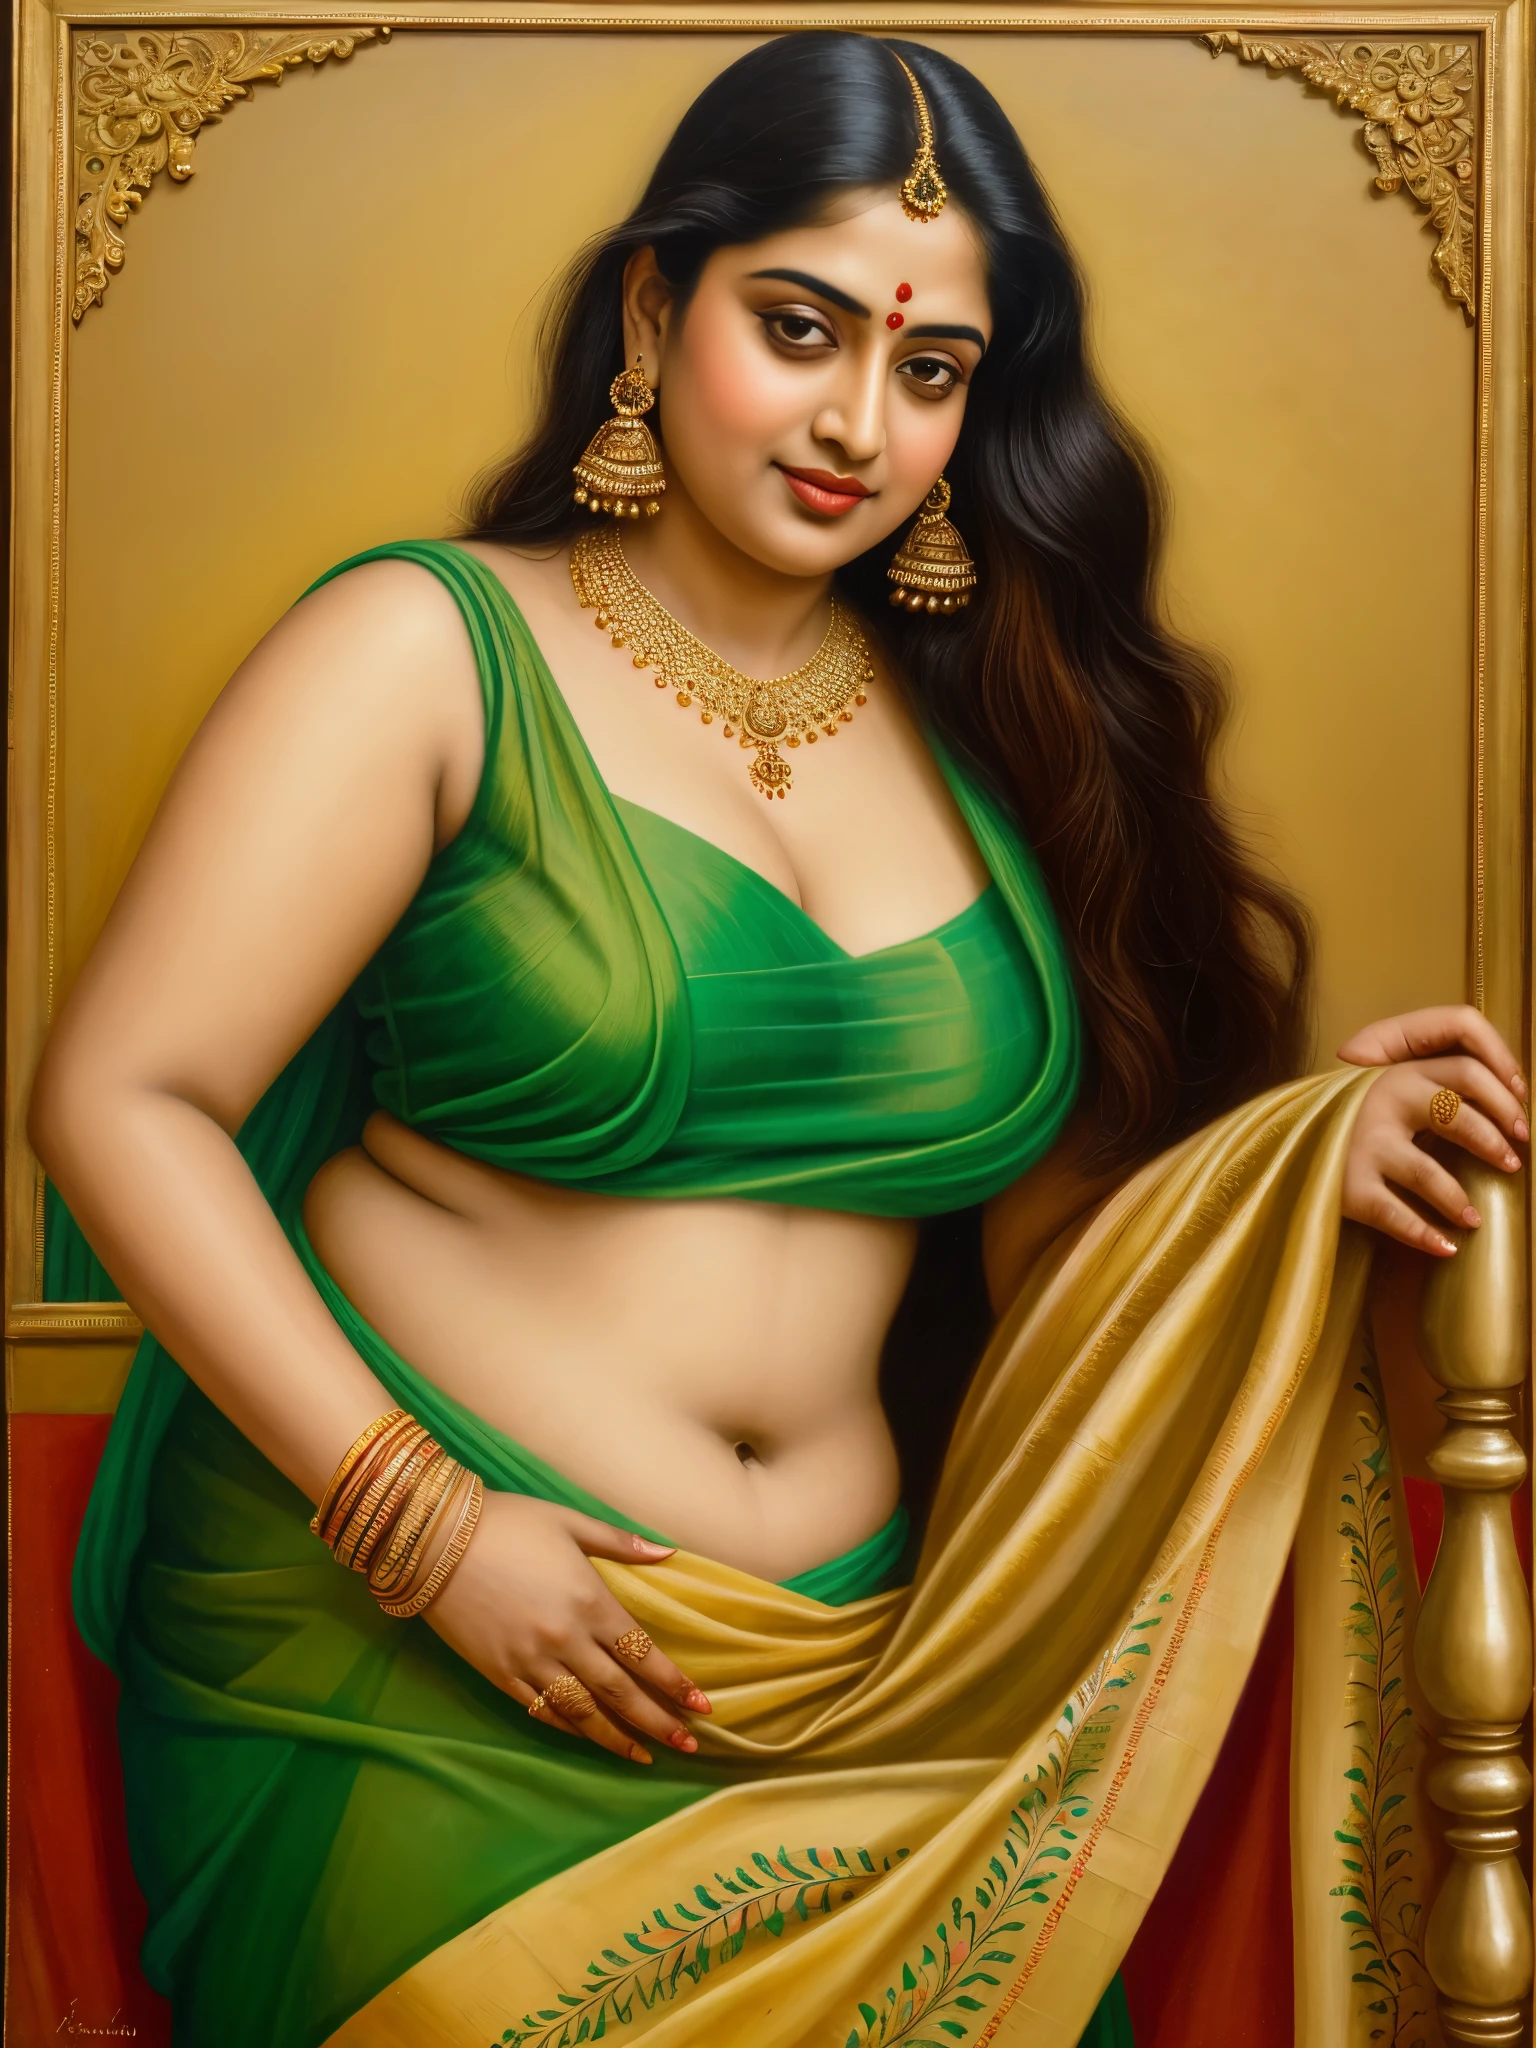 Beautiful painting of a woman in a sari with a necklace and earrings, beautiful thick figure, Thick curvy beauty, looks like Sandeepa Dhar, inspired by Raja Ravi Varma, szukalski ravi varma, portrait of a beautiful goddess, by Raja Ravi Varma, indian goddess, traditional beauty, a stunning portrait of a goddess, inspired by T. K. Padmini, indian art, indian goddess of wealth, portrait of a goddess